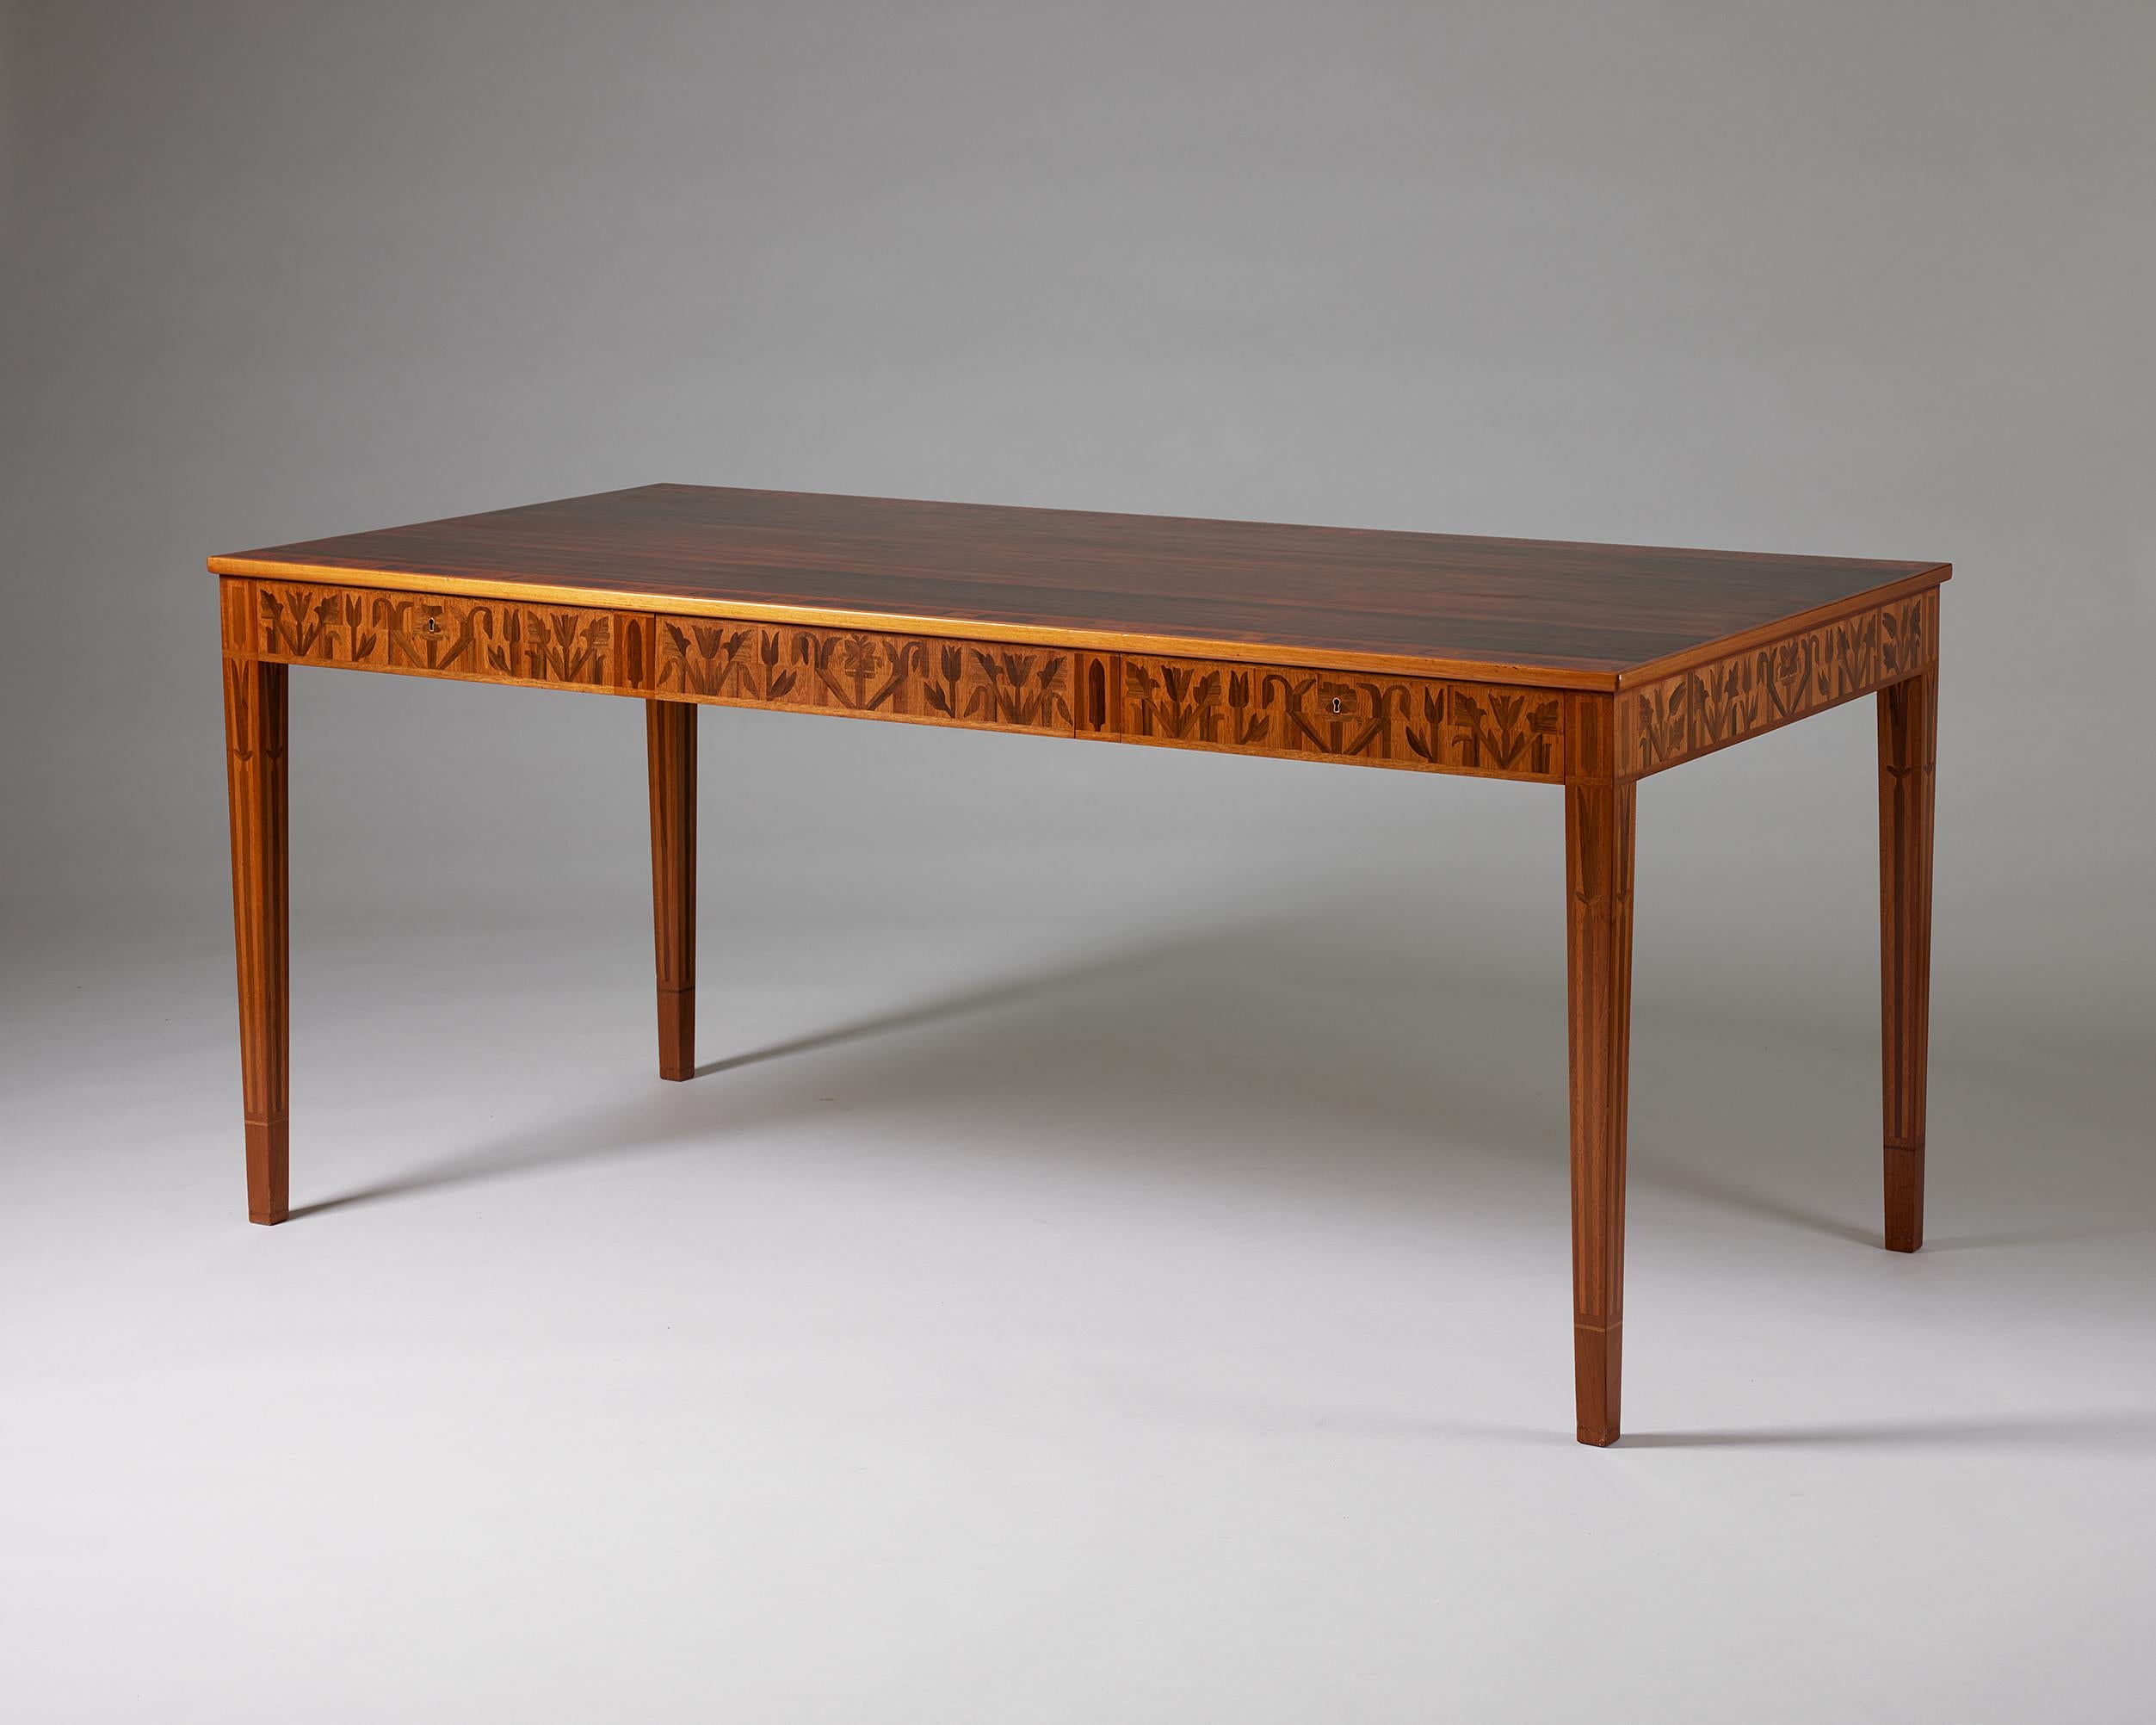 Desk ‘Ståndare’ designed by Carl Malmsten,
Sweden, 1950s-1960s.

Mahogany and exotic wood inlays.

Stamped.

A combination of intricate marquetry work and clean lines characterise this mahogany desk by Carl Malmsten from the 1950s -1960s. The